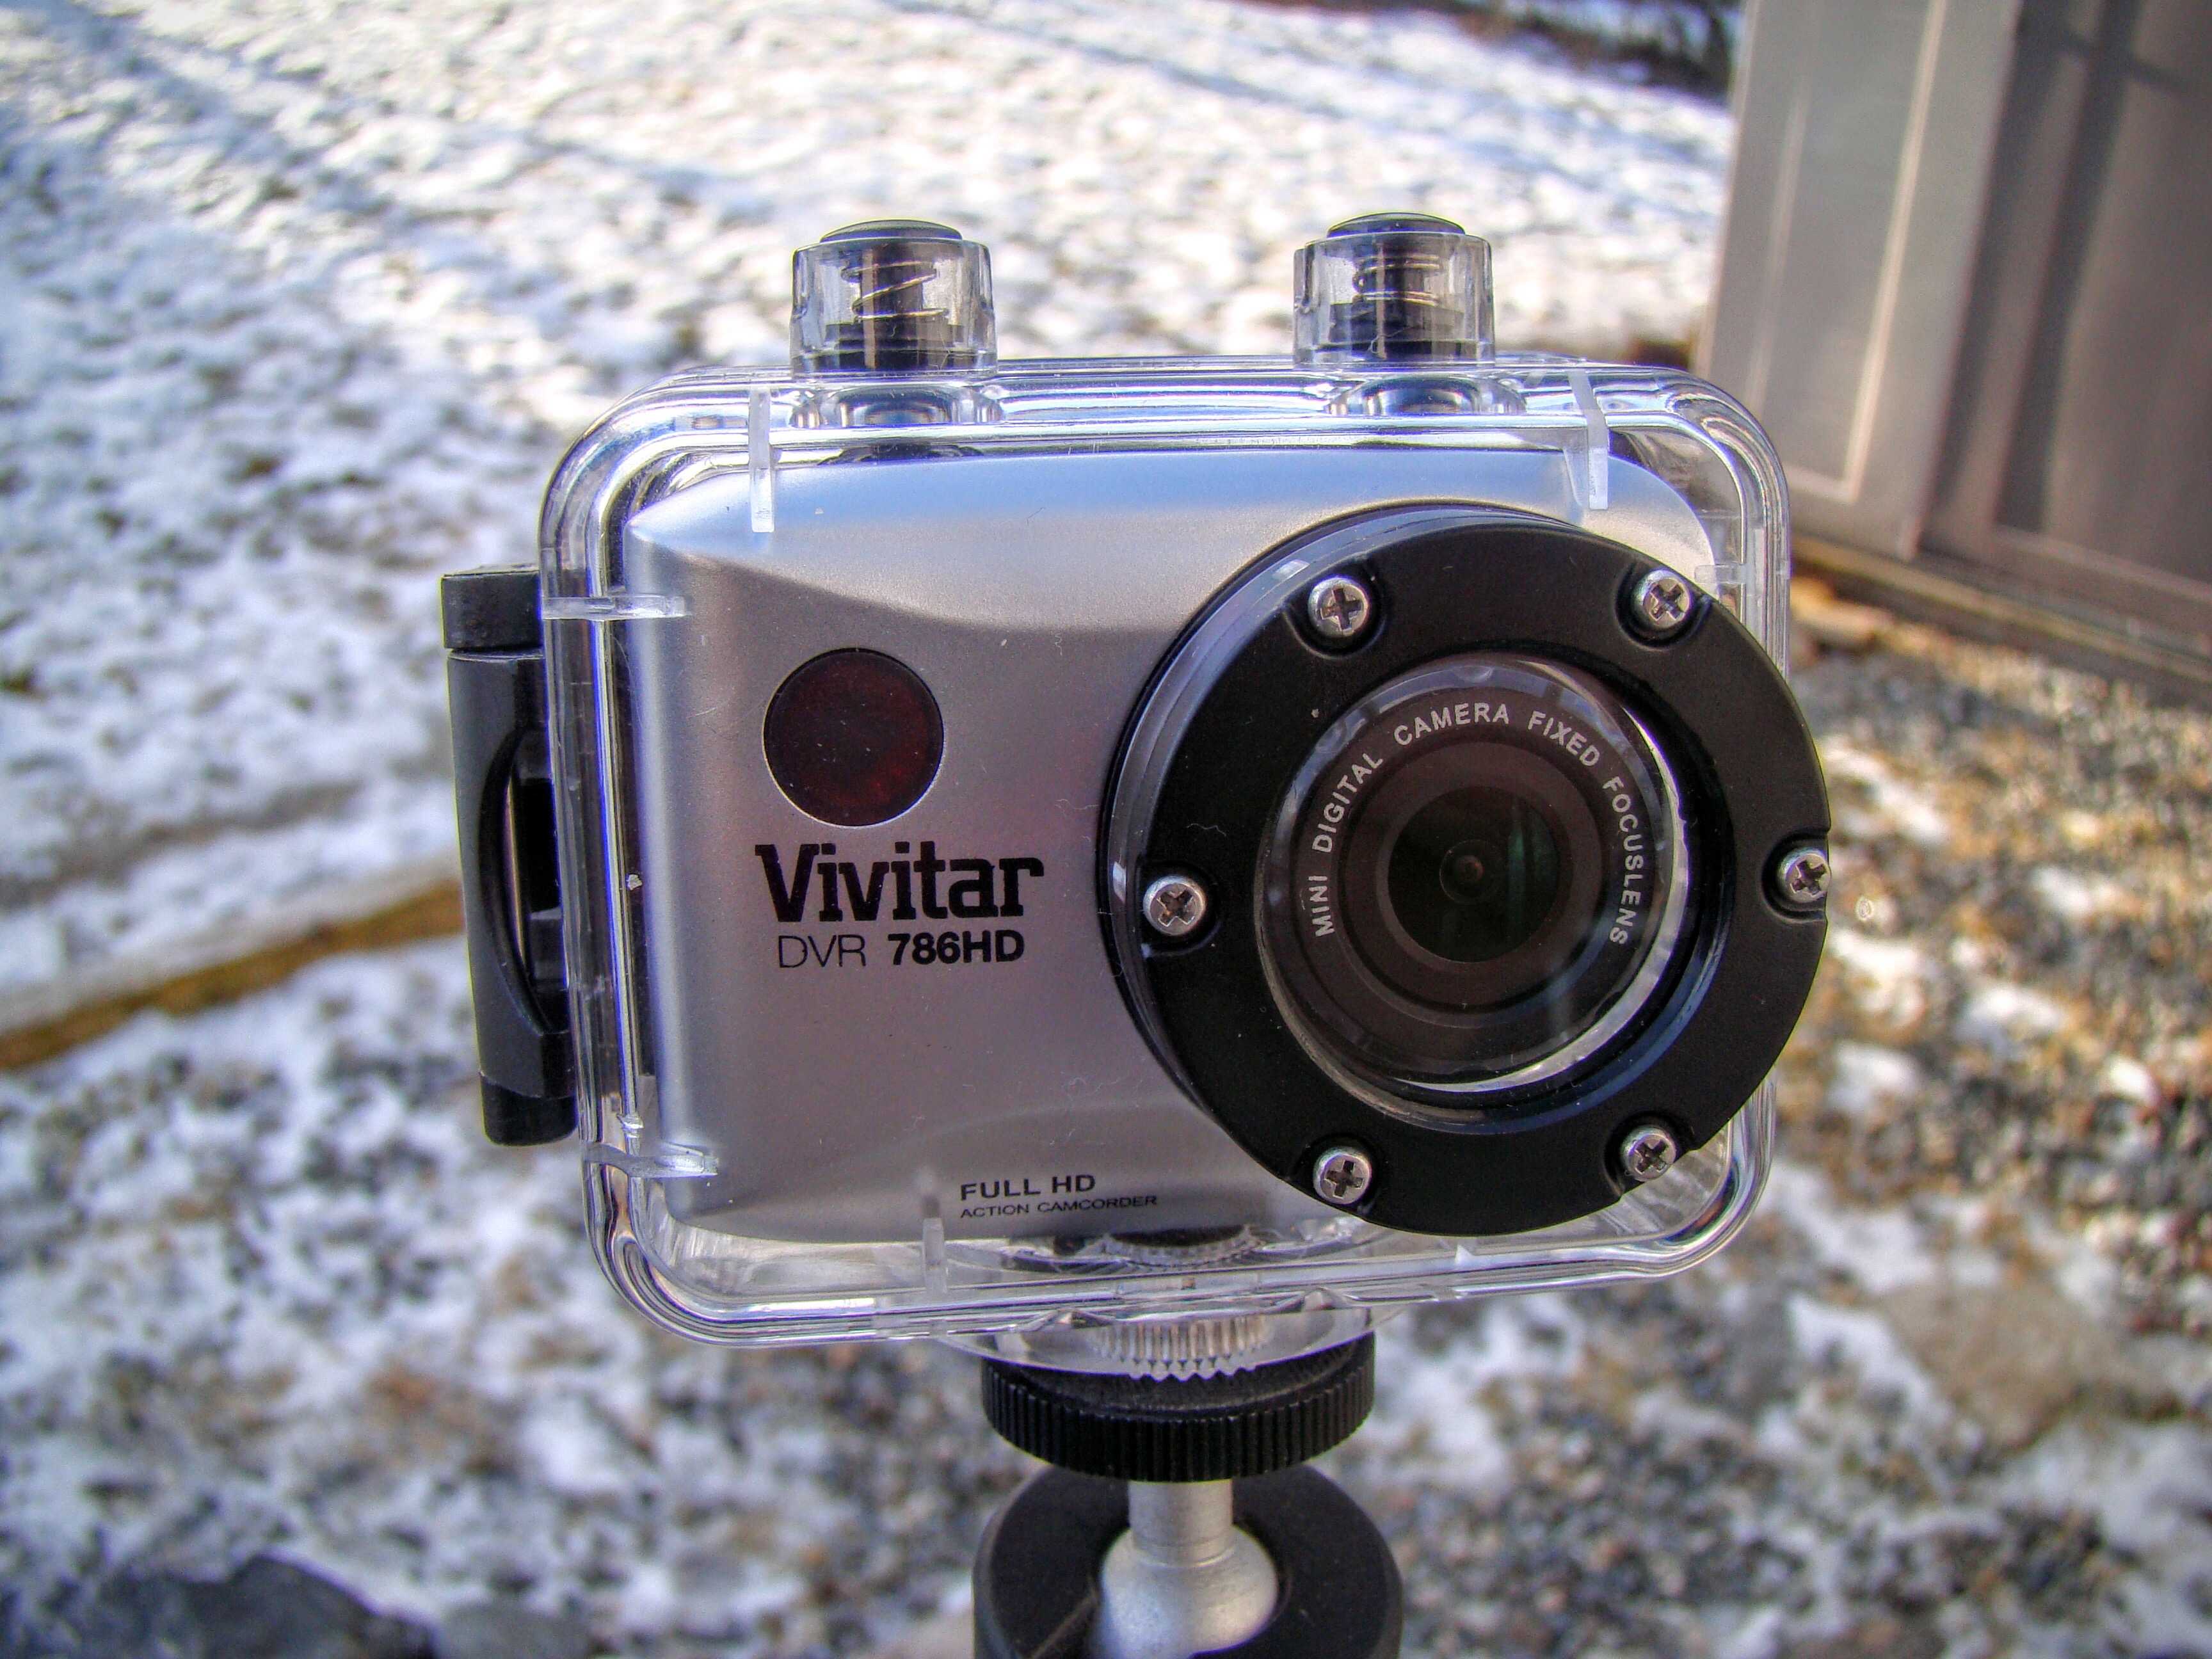 A capable, budget-friendly action camera.